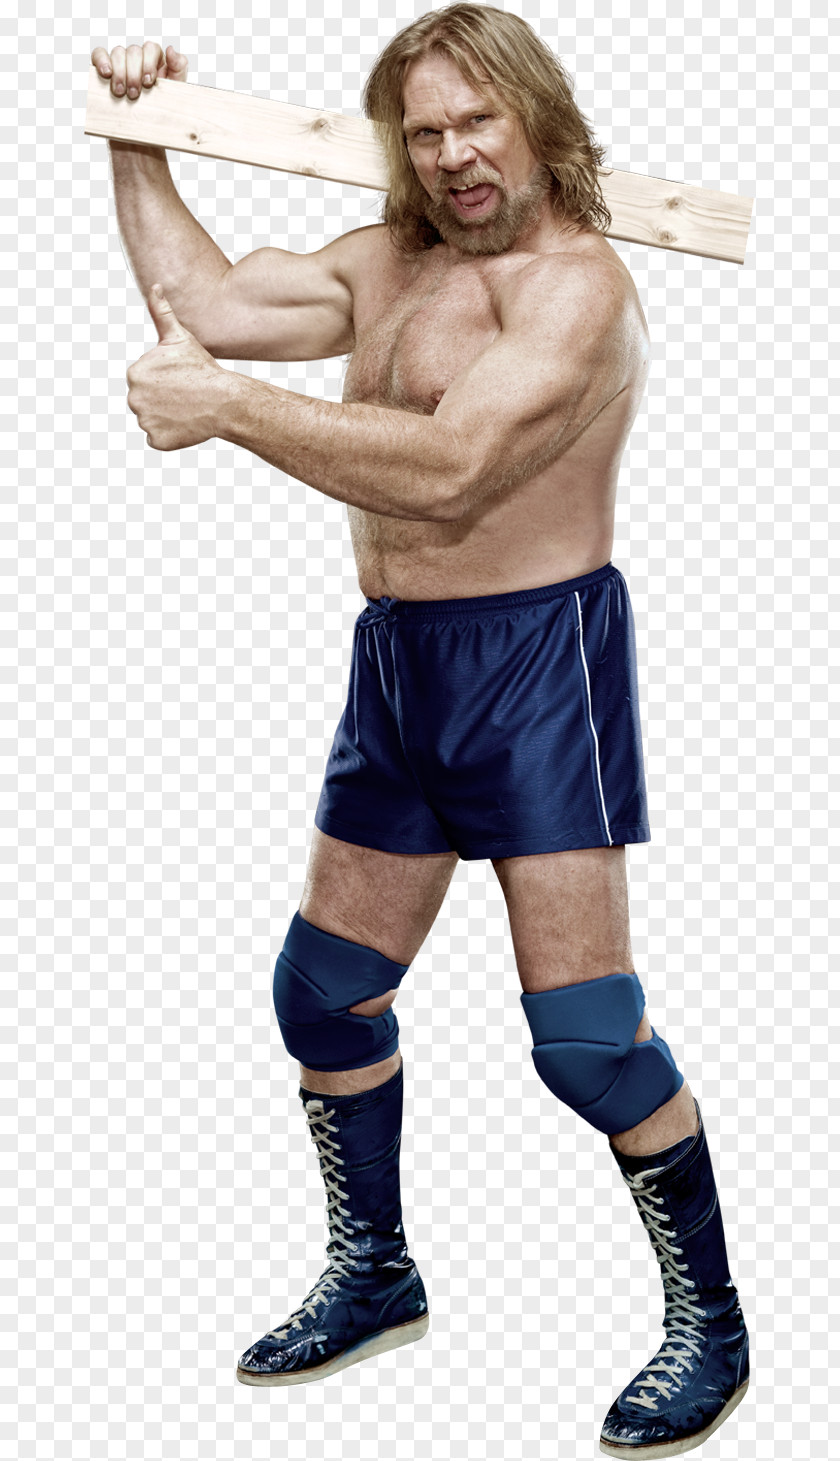 Jim Duggan Taboo Tuesday (2005) Royal Rumble (1991) (2012) WWE Hall Of Fame PNG of Fame, wwe clipart PNG